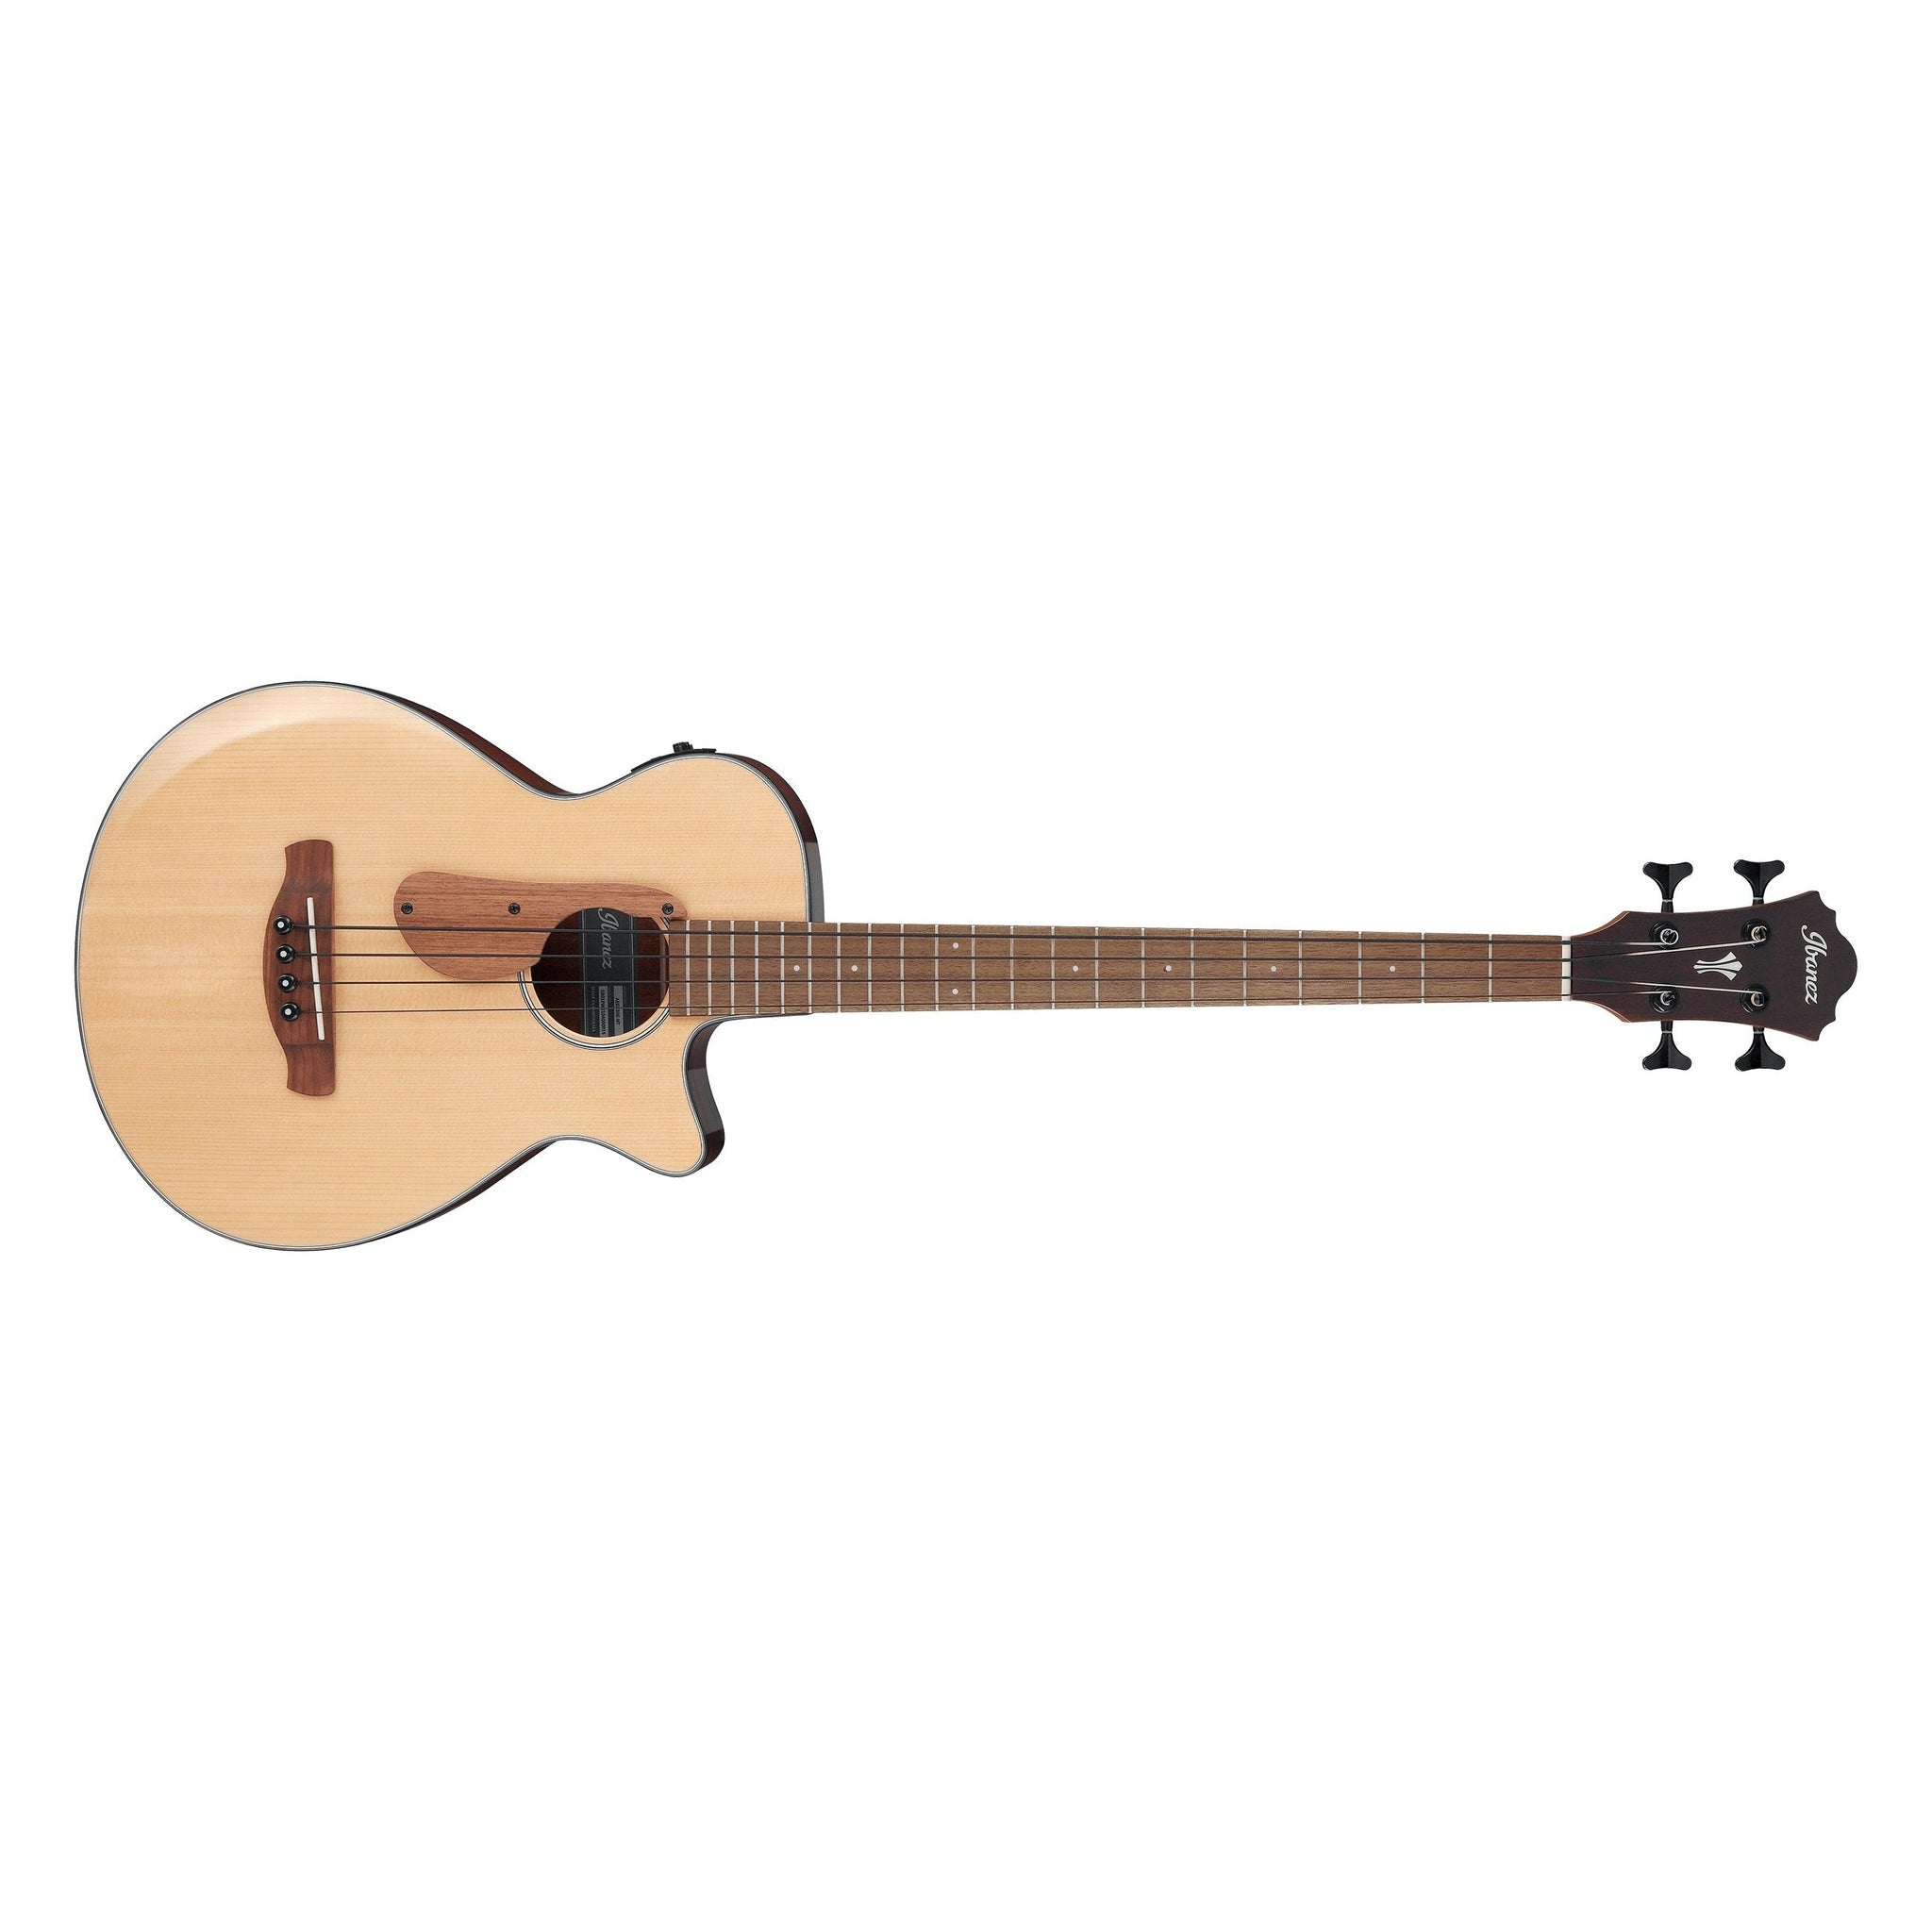 Ibanez AEGB30E-NTG Acoustic/Electric Bass Guitar-Natural High Gloss-Music World Academy